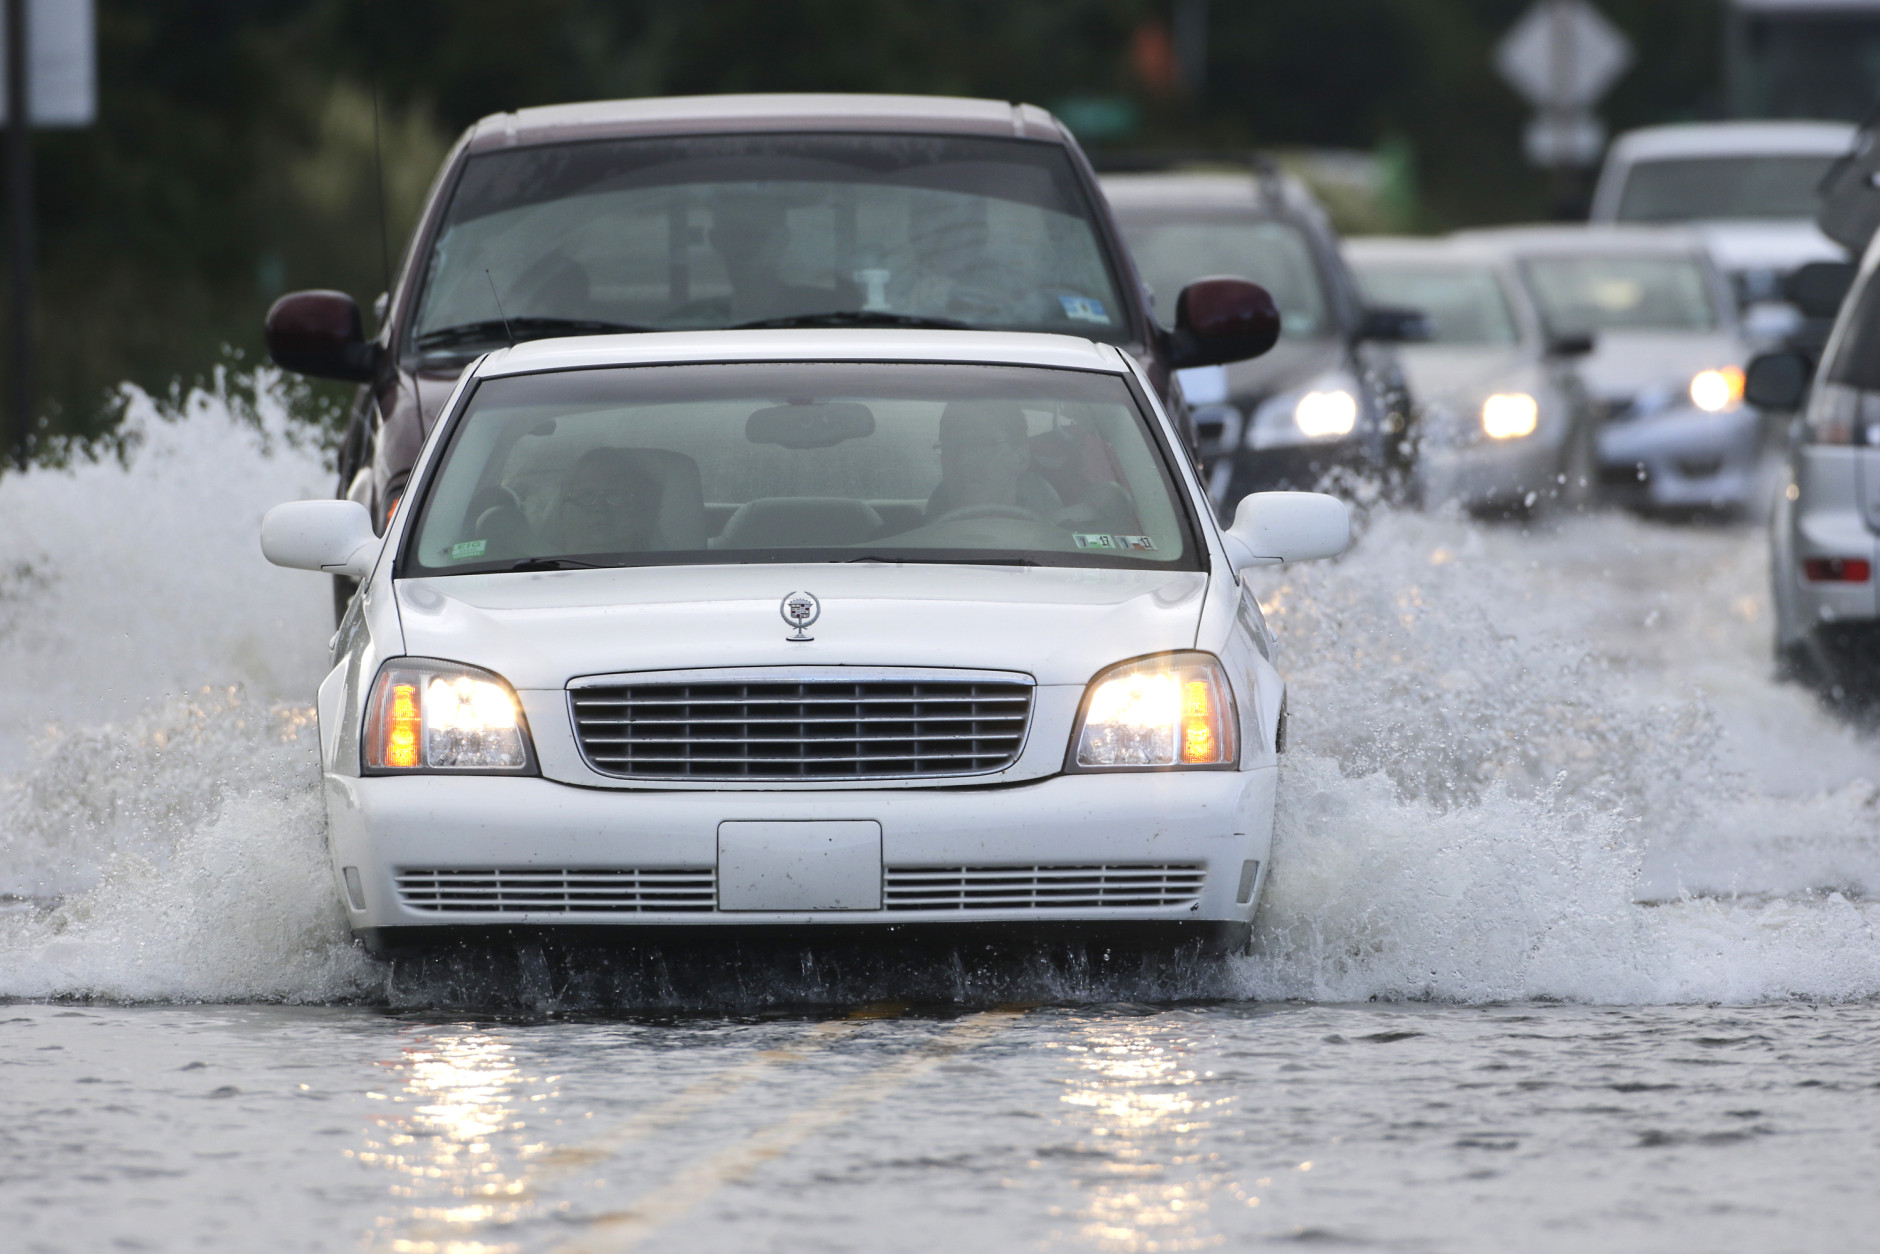 Cars drive on the flood NC Hwy 12 in Rodanthe, N.C., Saturday, Sept. 3, 2016 after Tropical Storm Hermine passed the Outer Banks.  The storm is expected to dump several inches of rain in parts of coastal Virginia, Maryland, Delaware, New Jersey and New York as the Labor Day weekend continues.  (AP Photo/Tom Copeland)